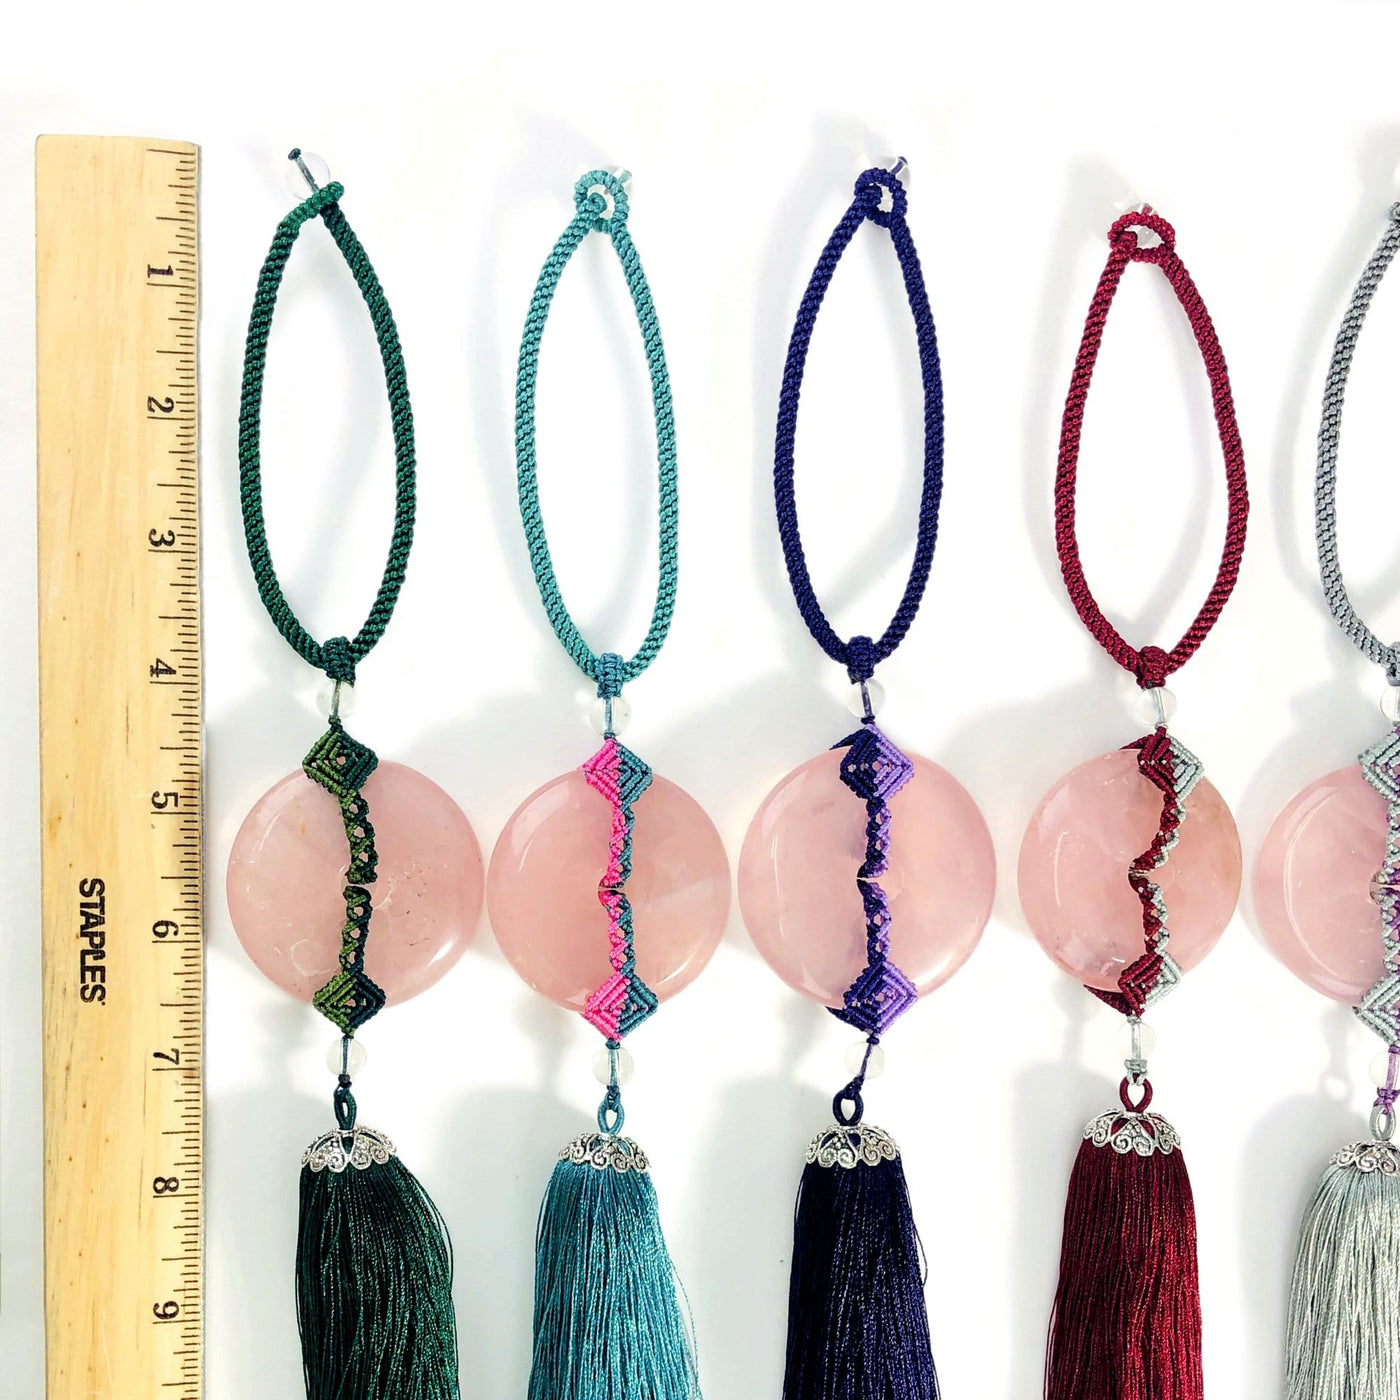 4 Rose Quartz Tassels of different colors next to a ruler for size reference